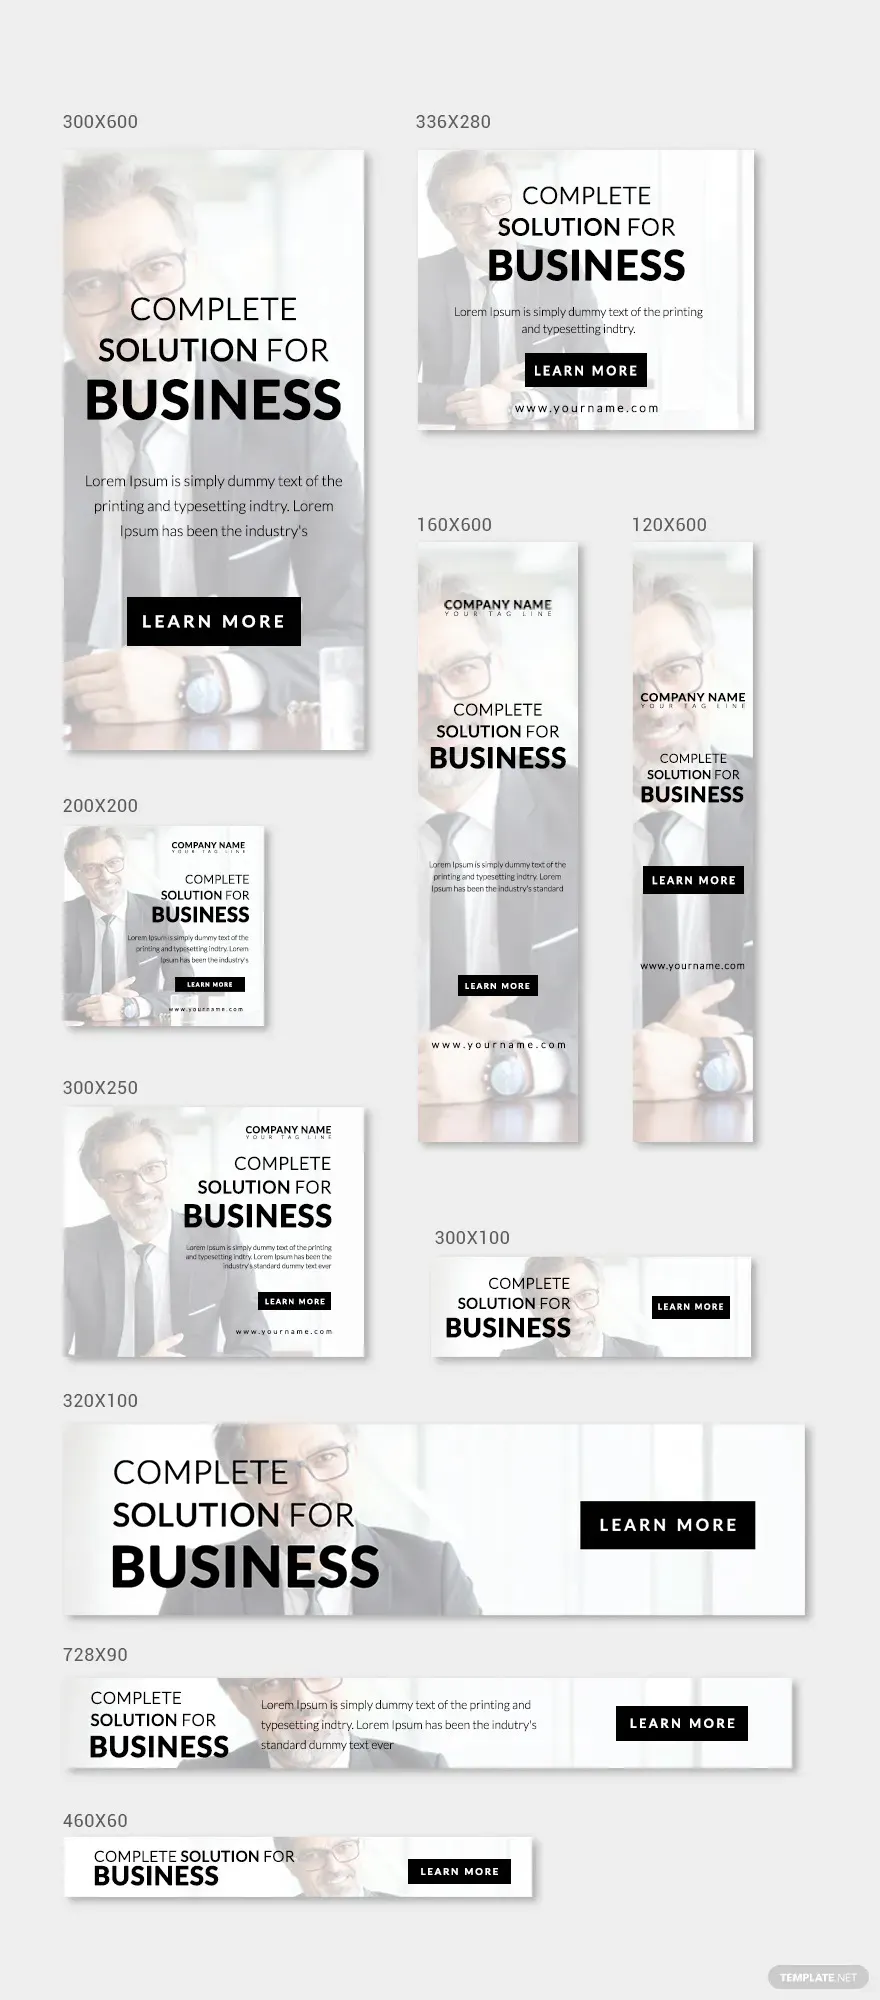 ideas for business banner with examples